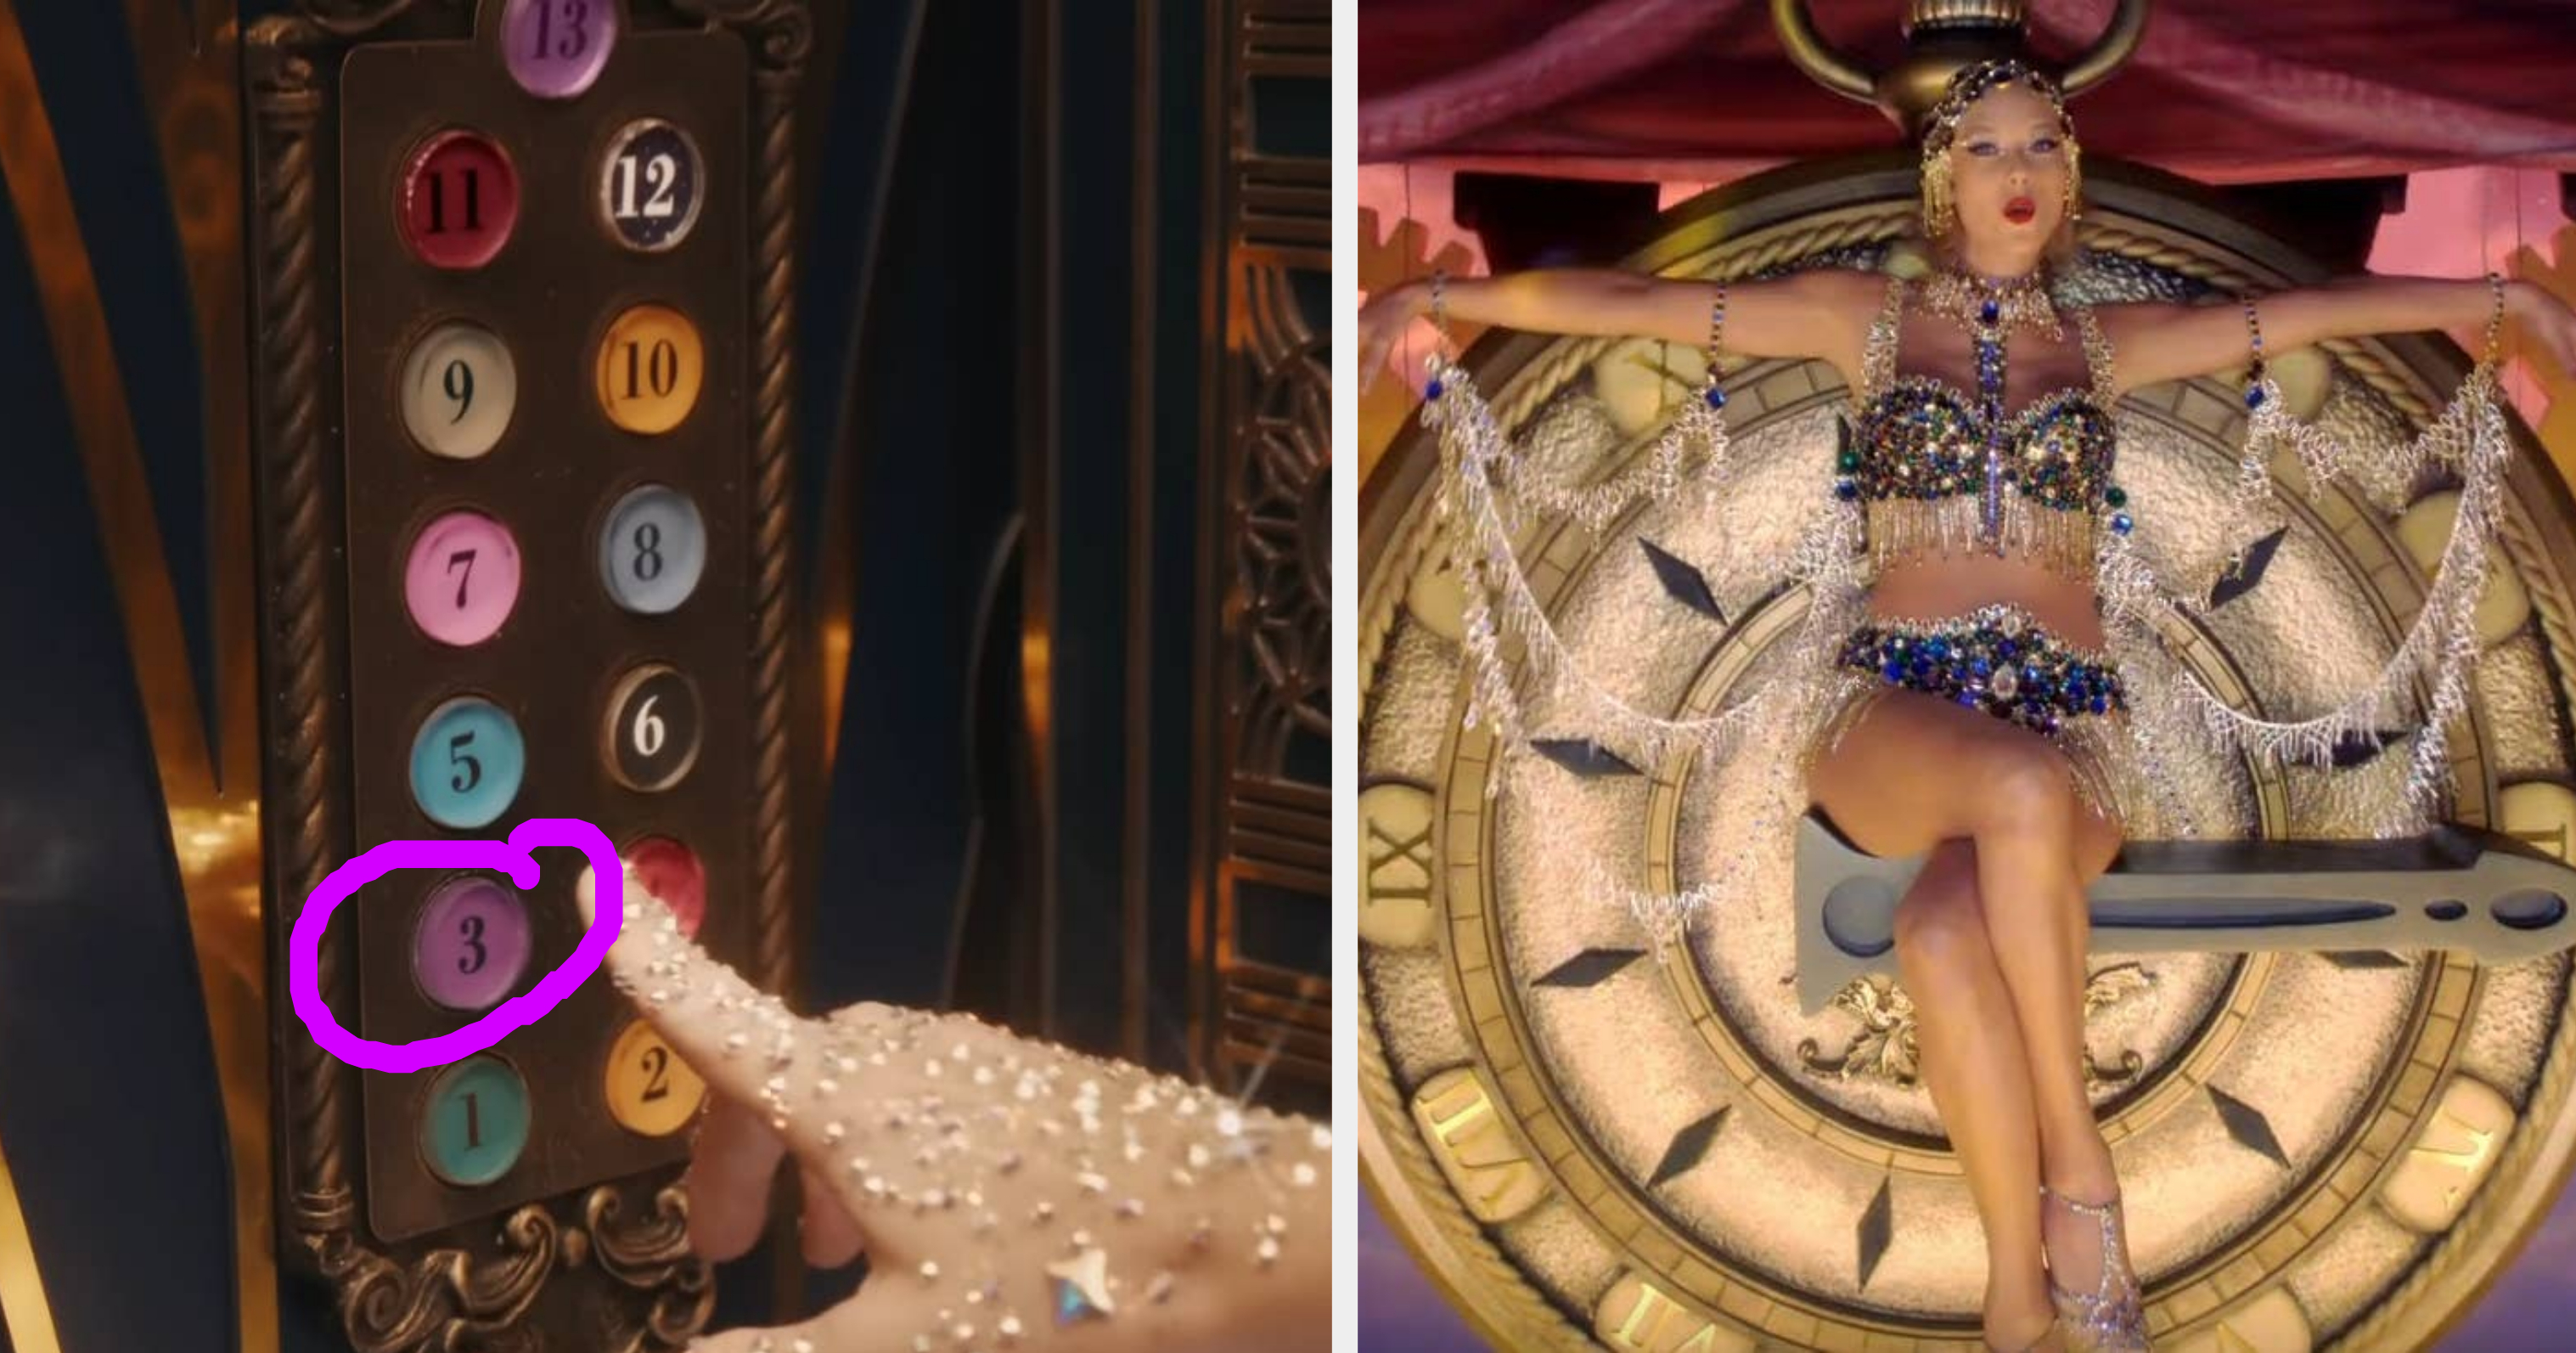 Breaking down the easter eggs in Taylor Swift's Bejeweled music video